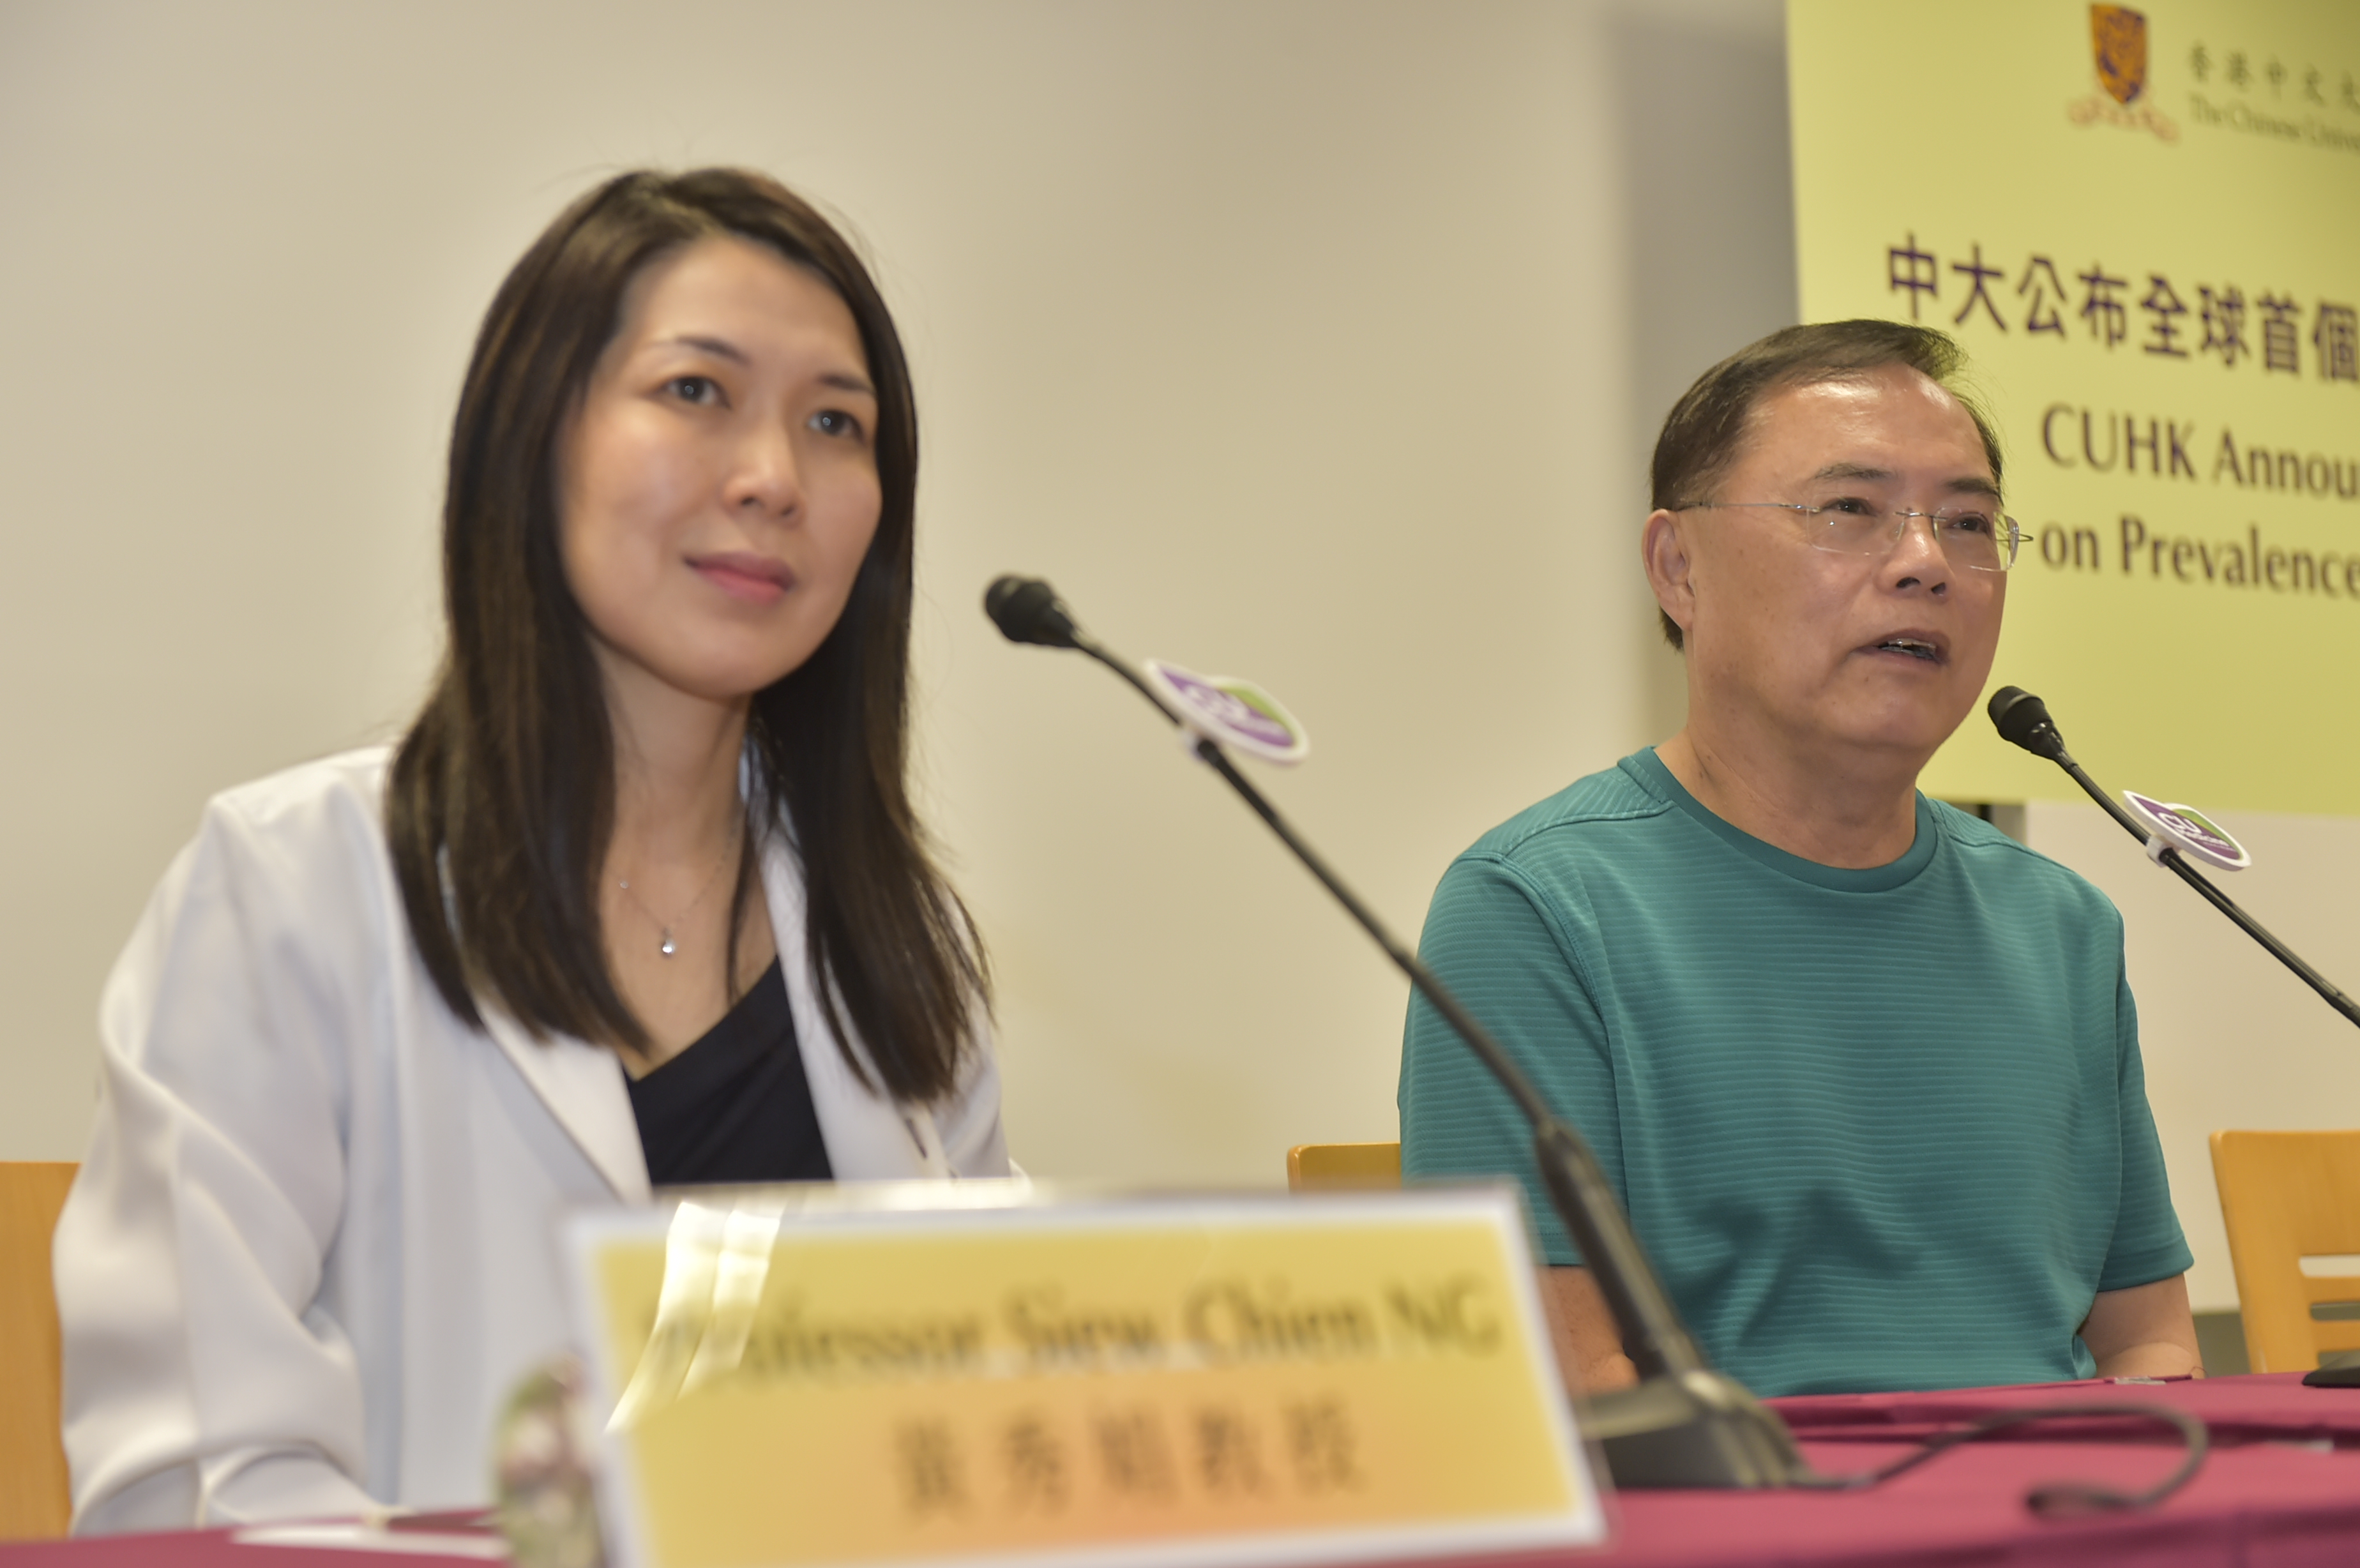 Mr LO (right) shares that his Helicobacter pylori infection has been eradicated after receiving antibiotics treatment.